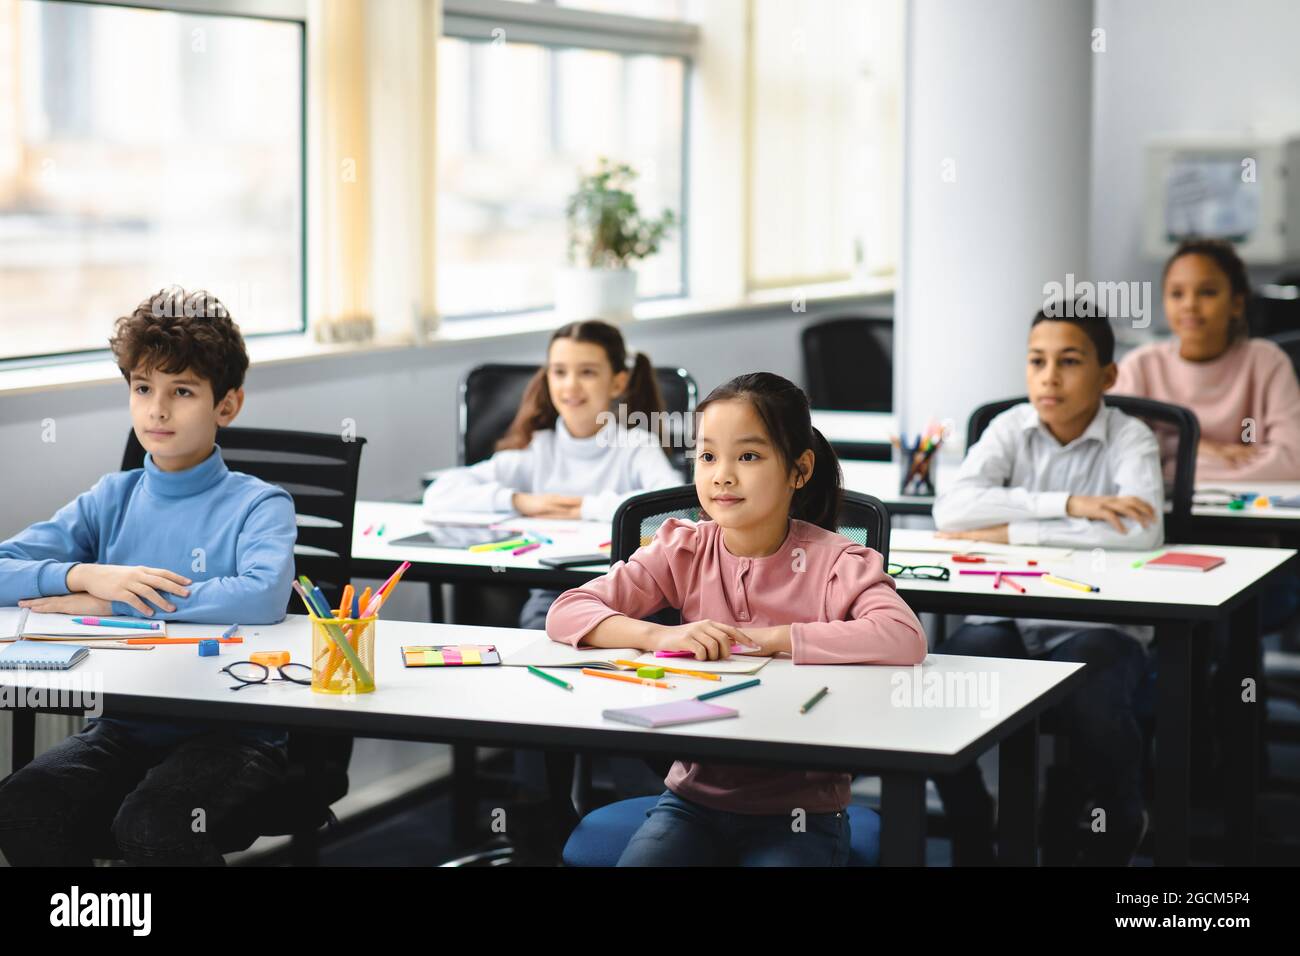 Portrait of focused diverse pupils sitting at desk in classroom Stock Photo